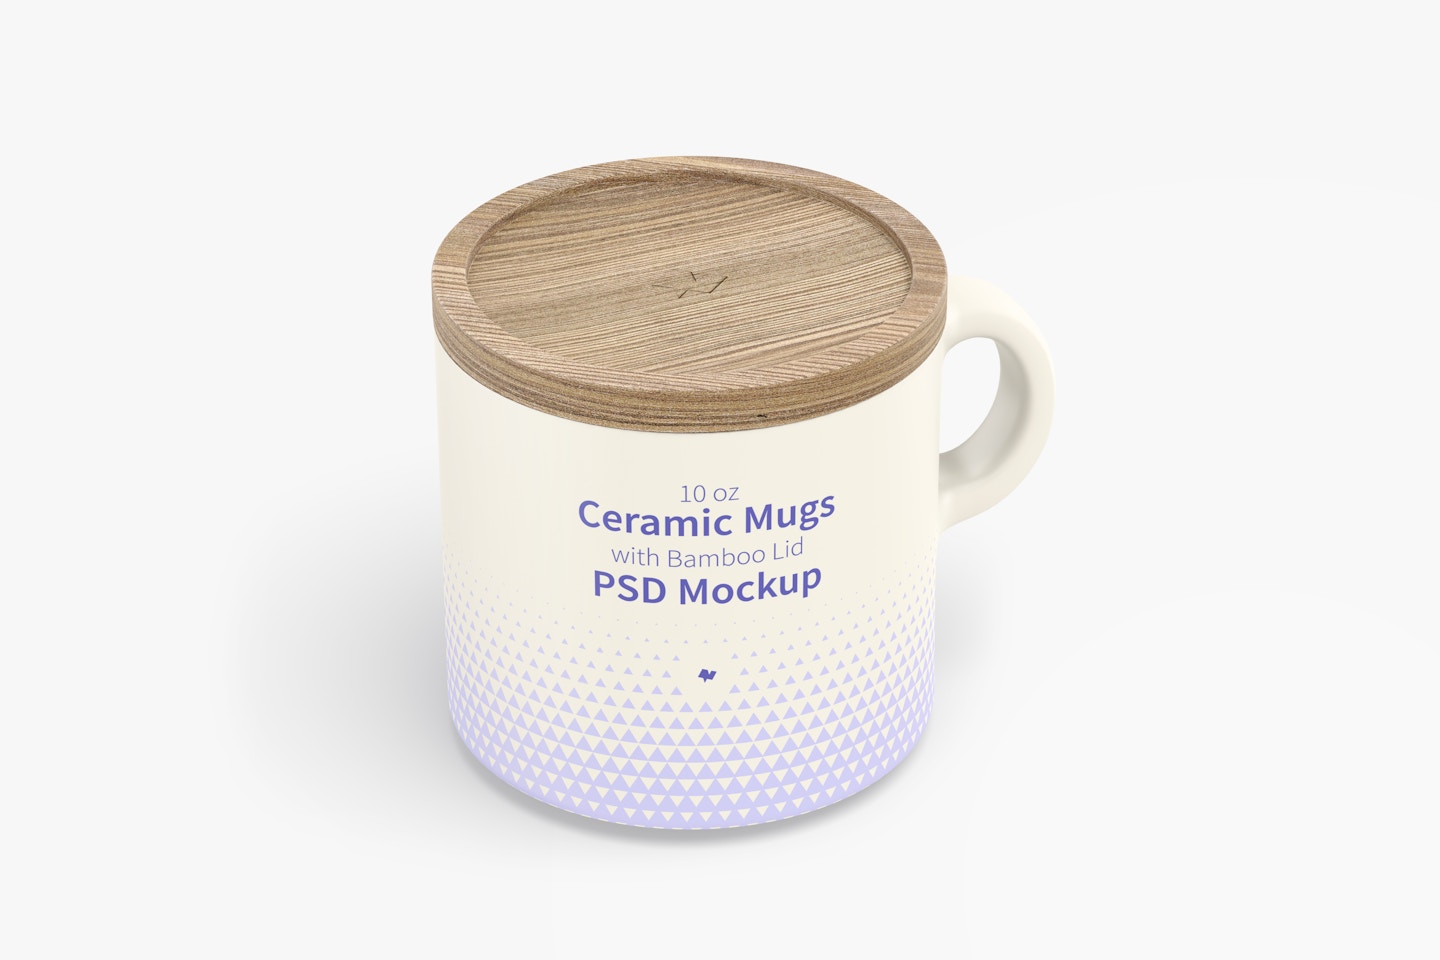 10 oz Ceramic Mugs with Bamboo Lid Mockup, Isometric Right View